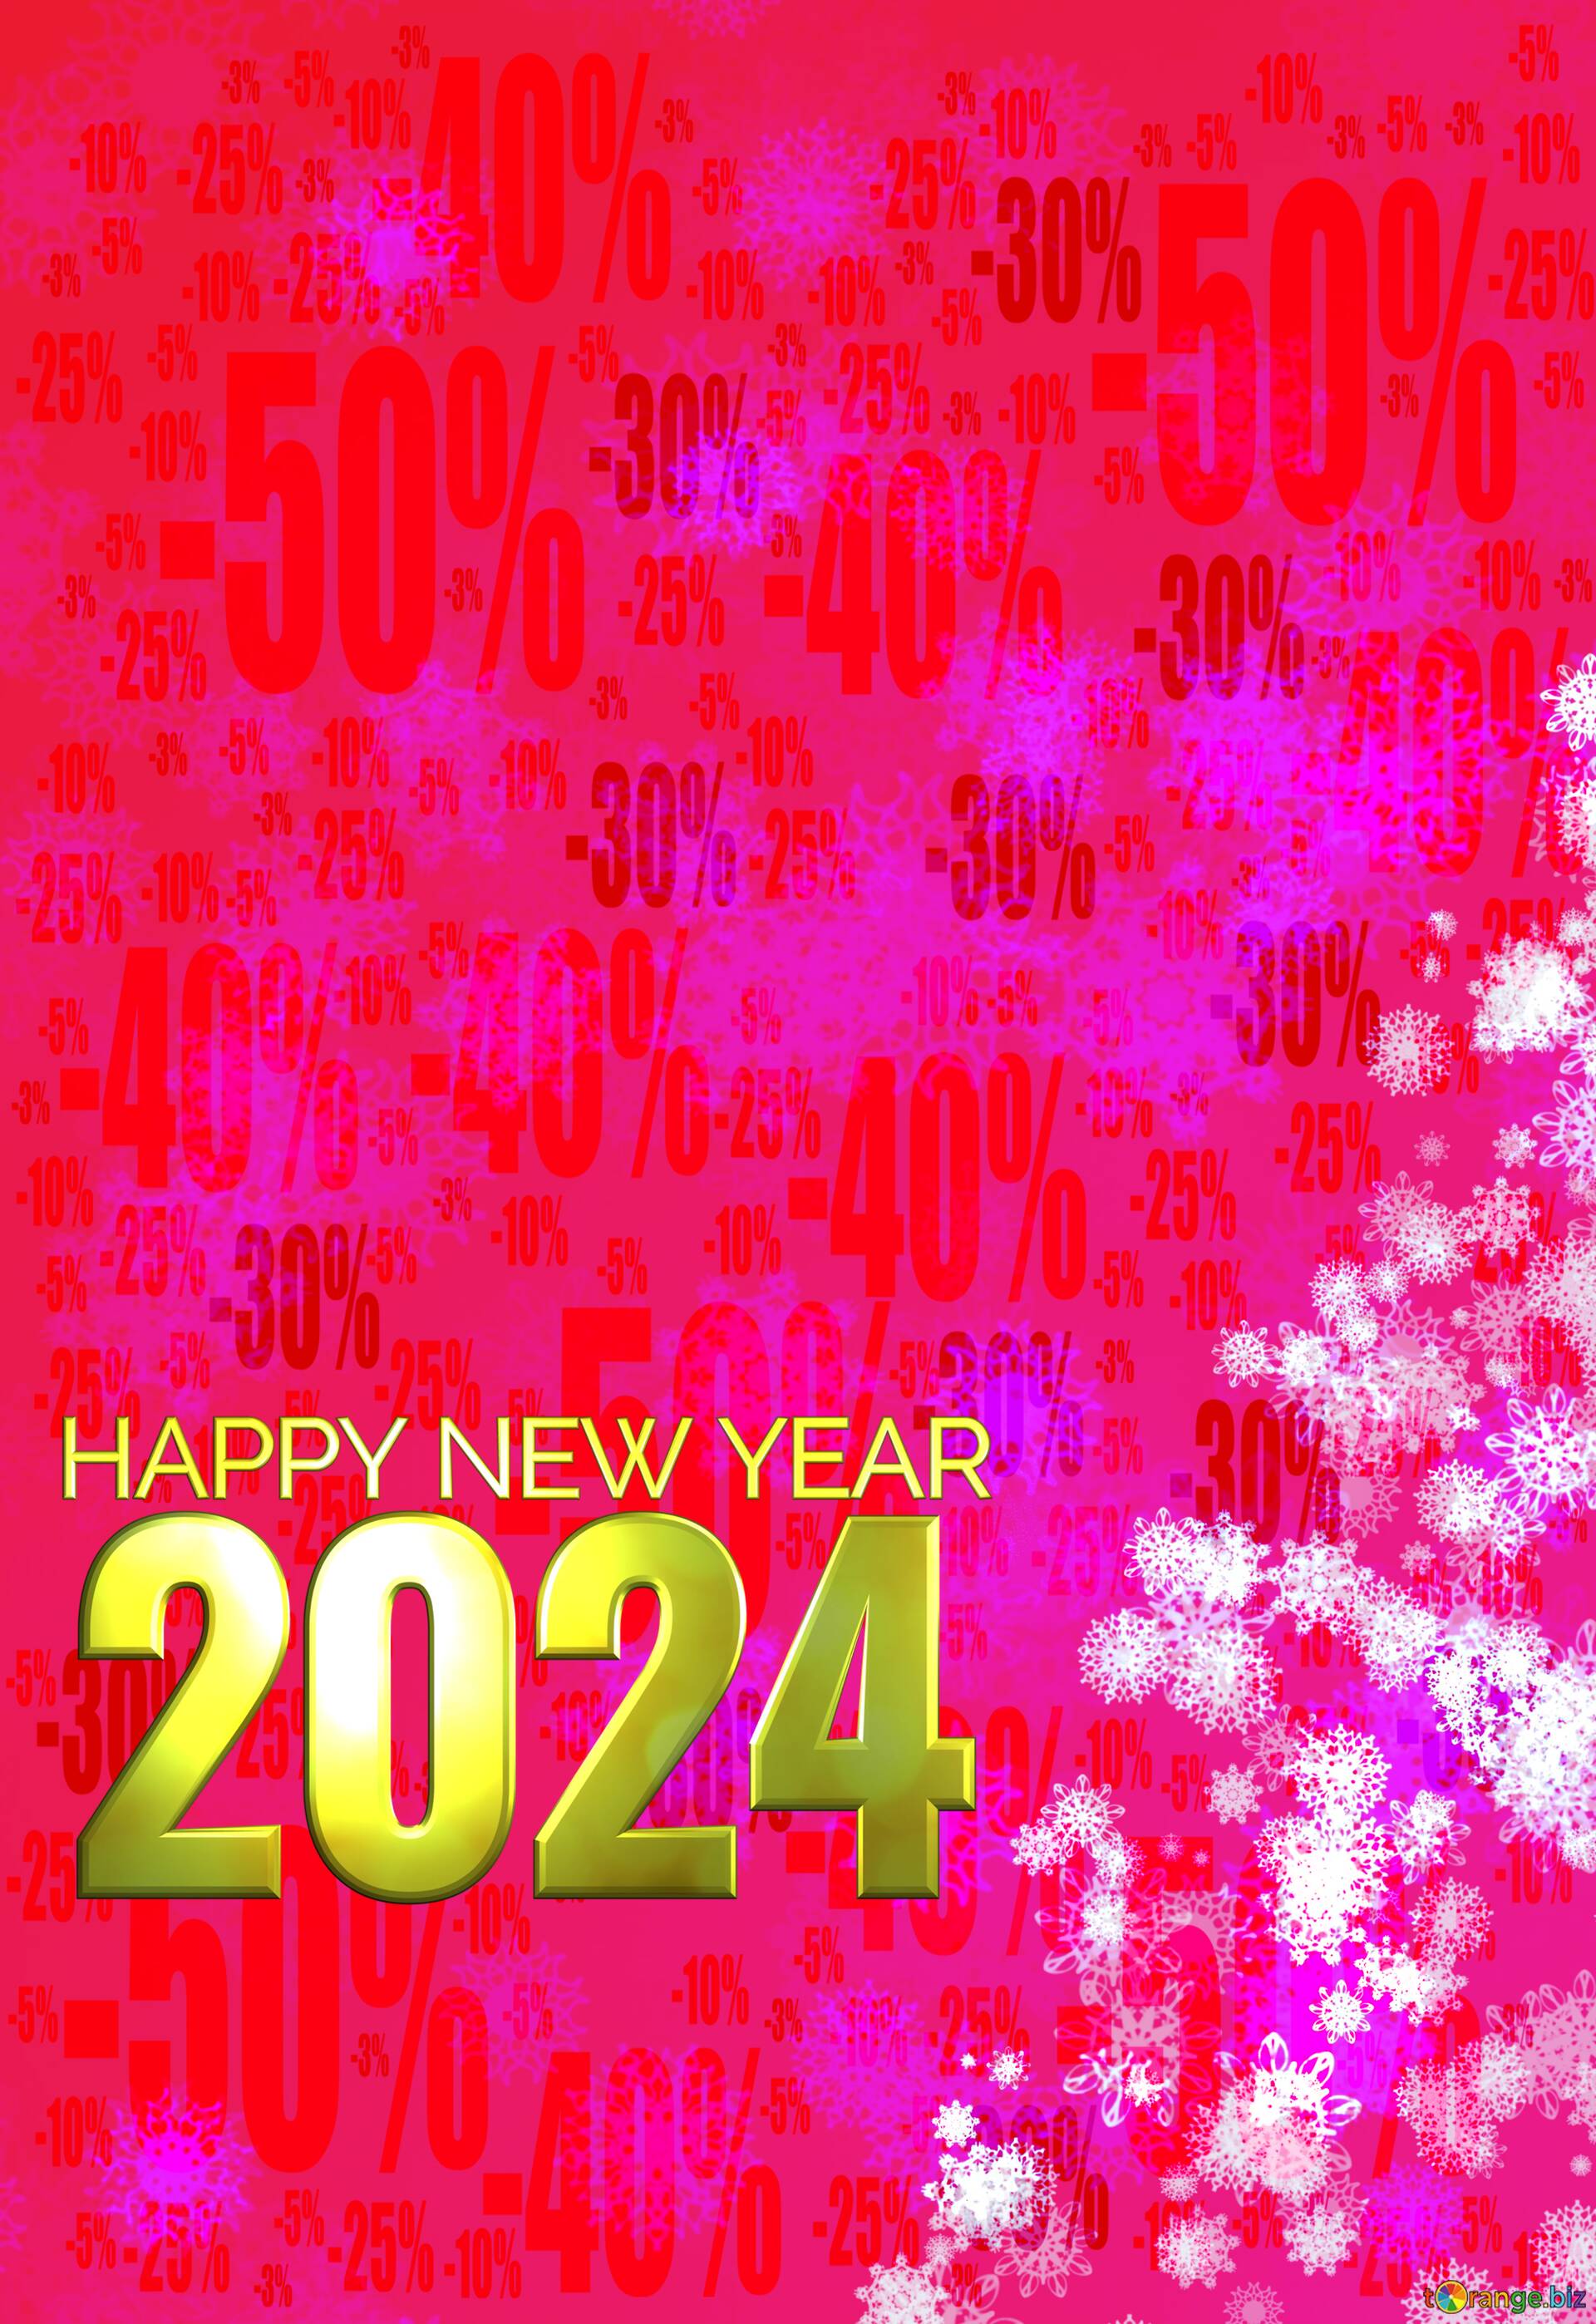 Download free picture New year pink winter sale background 2024 Sale